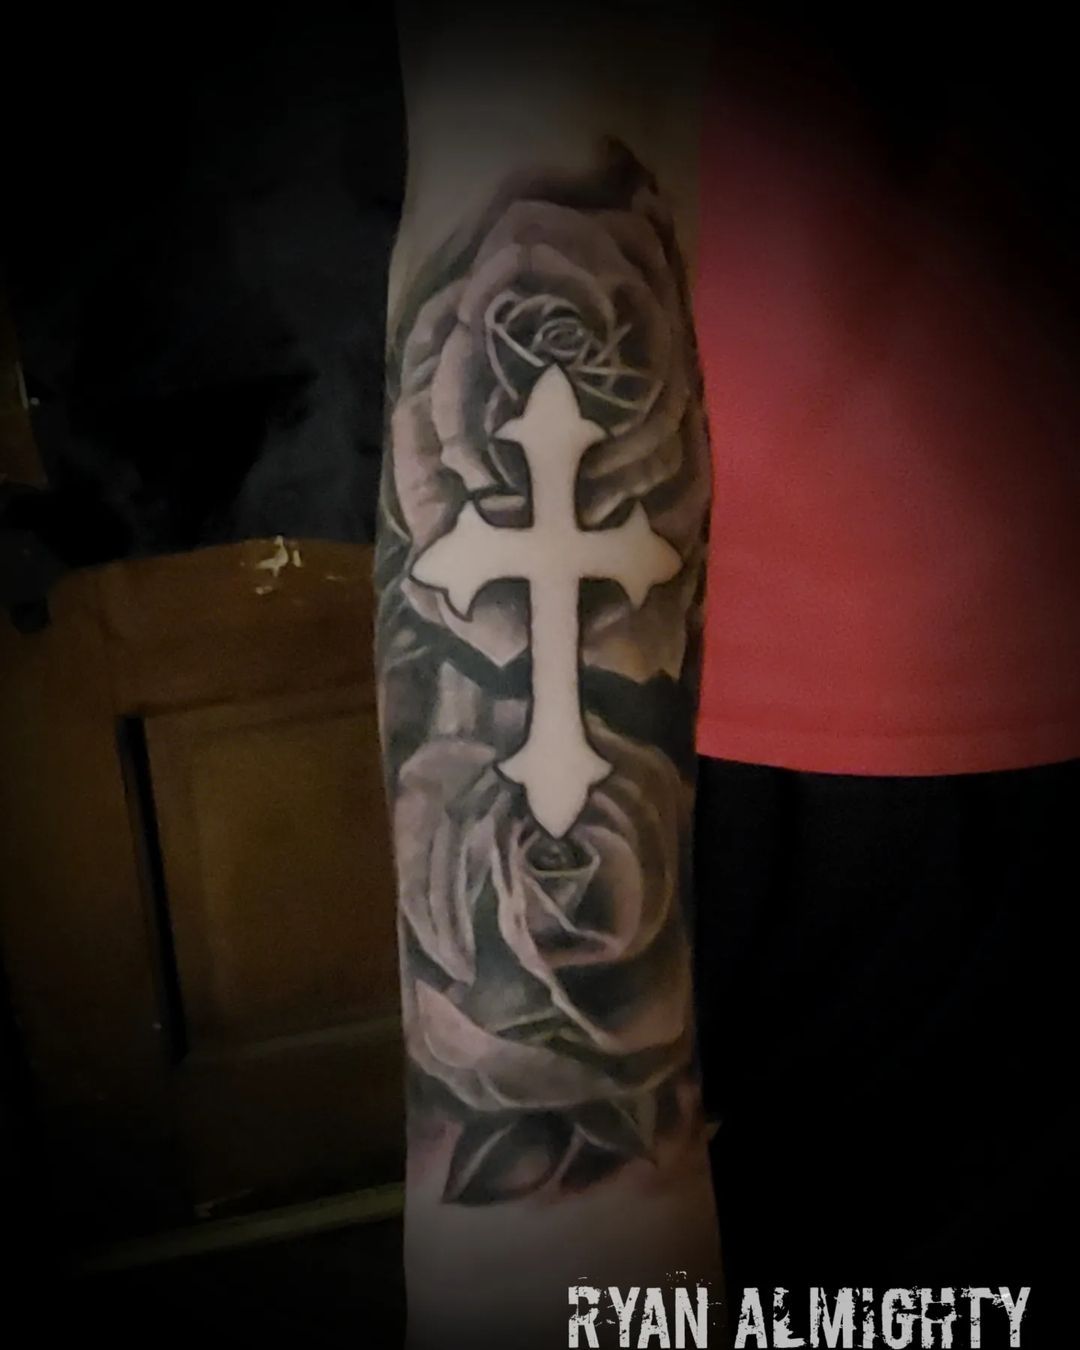 Fun night doing black and gray roses with negative space cross
#almightystudios #RyanAlmighty #rosetattoo #crosstattoo #tattoo #tattoolife #crossrosetattoo (at Almighty Studios Gallerie...